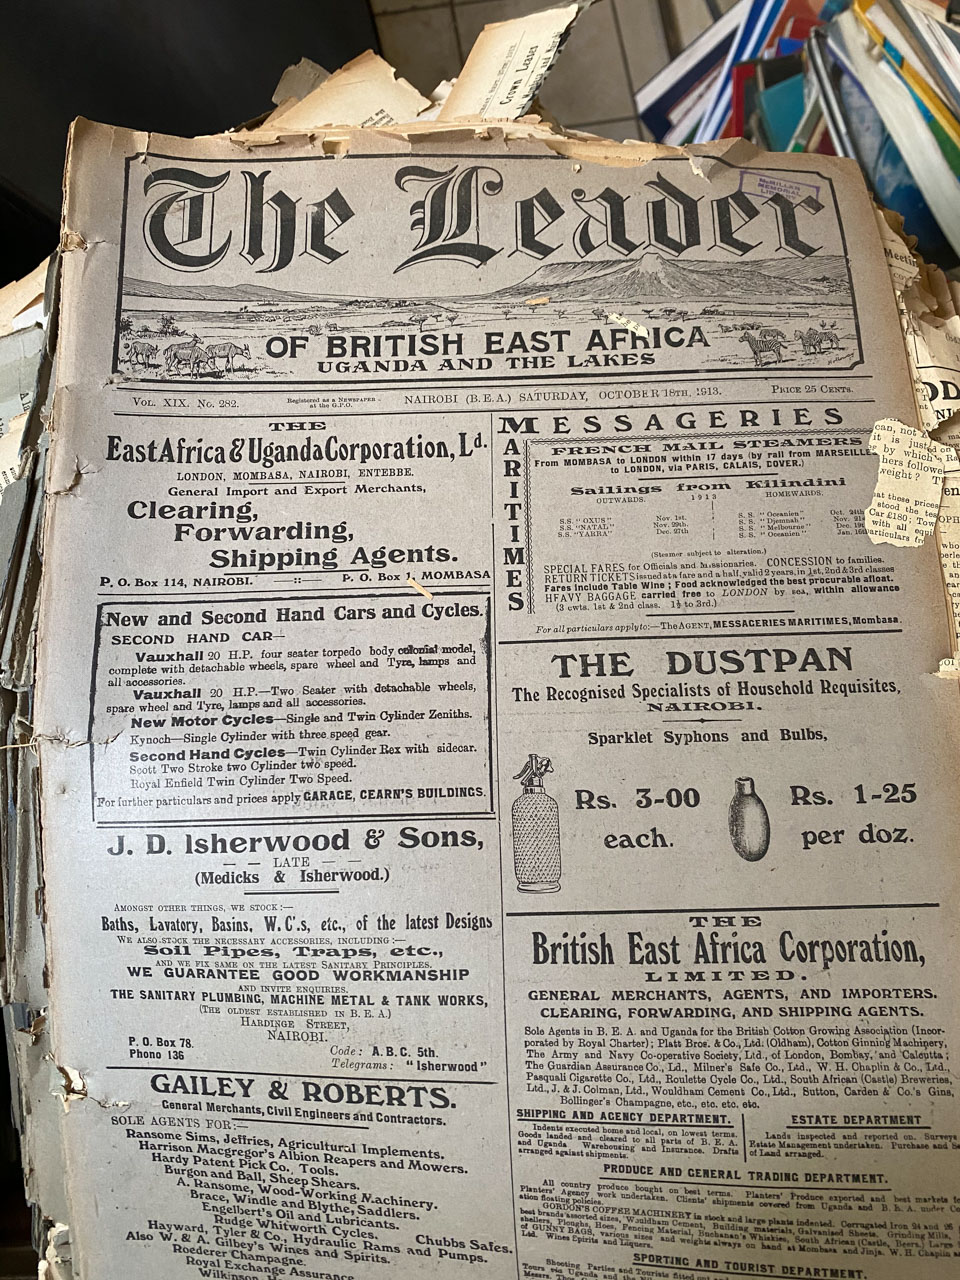 Its impressive newspaper collection dates back to 1906